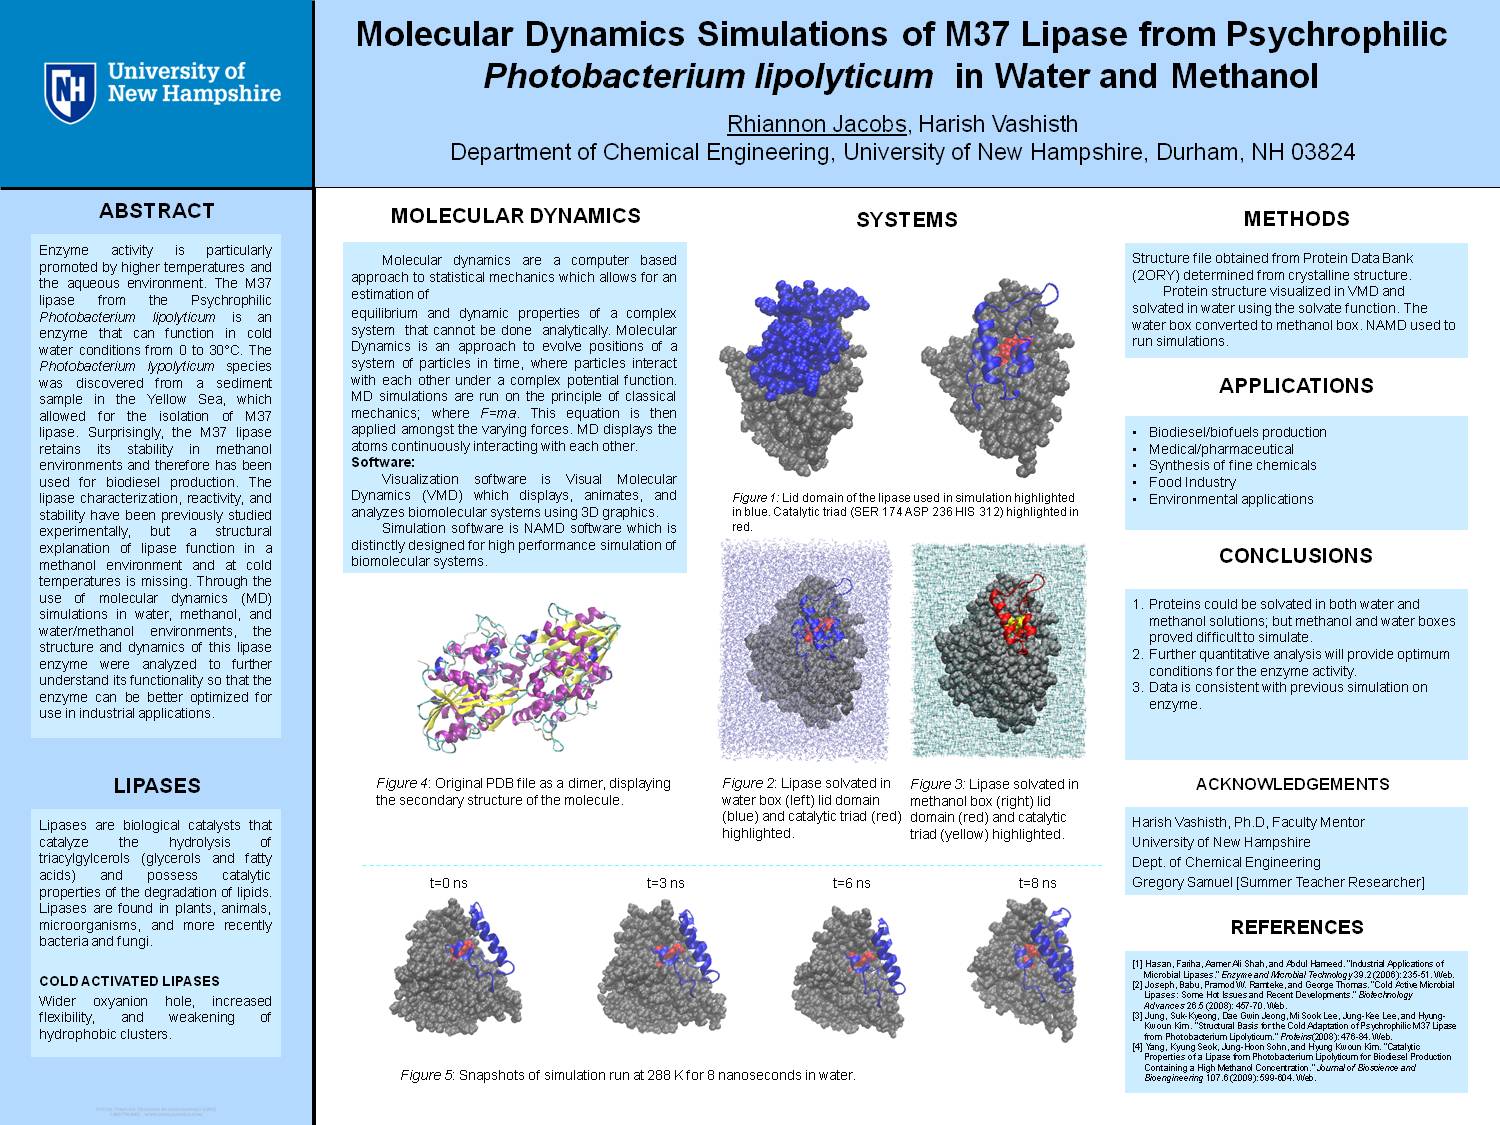 Molecular Dynamics Simulations Of M37 Lipase From Psychrophilic Photobacterium Lipolyticum  In Water And Methanol by rlk58